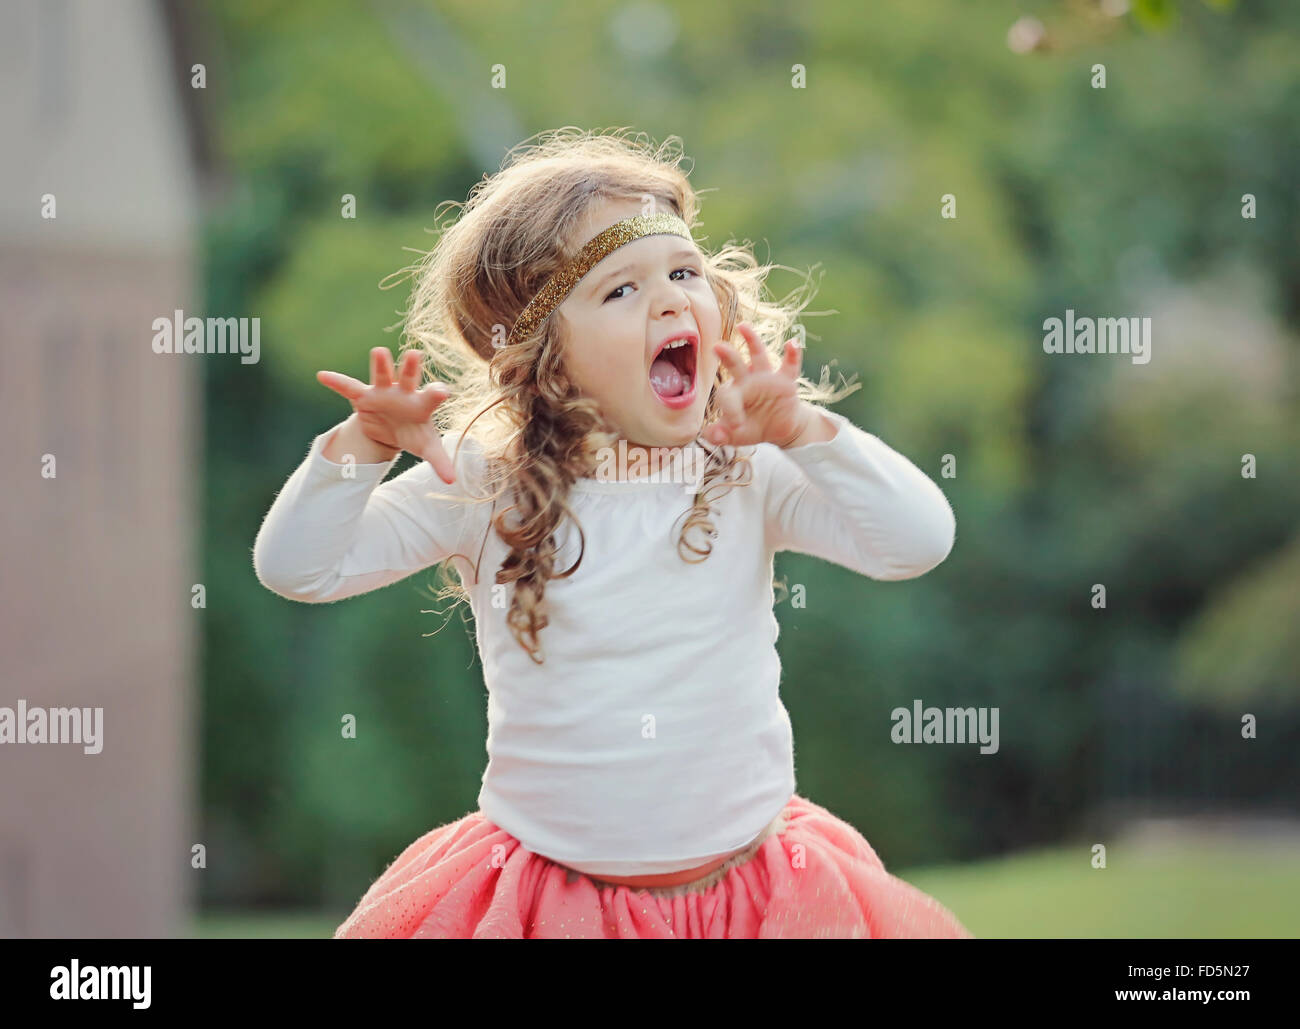 Toddler girl pretending to roar like a lion while playing outside. Stock Photo